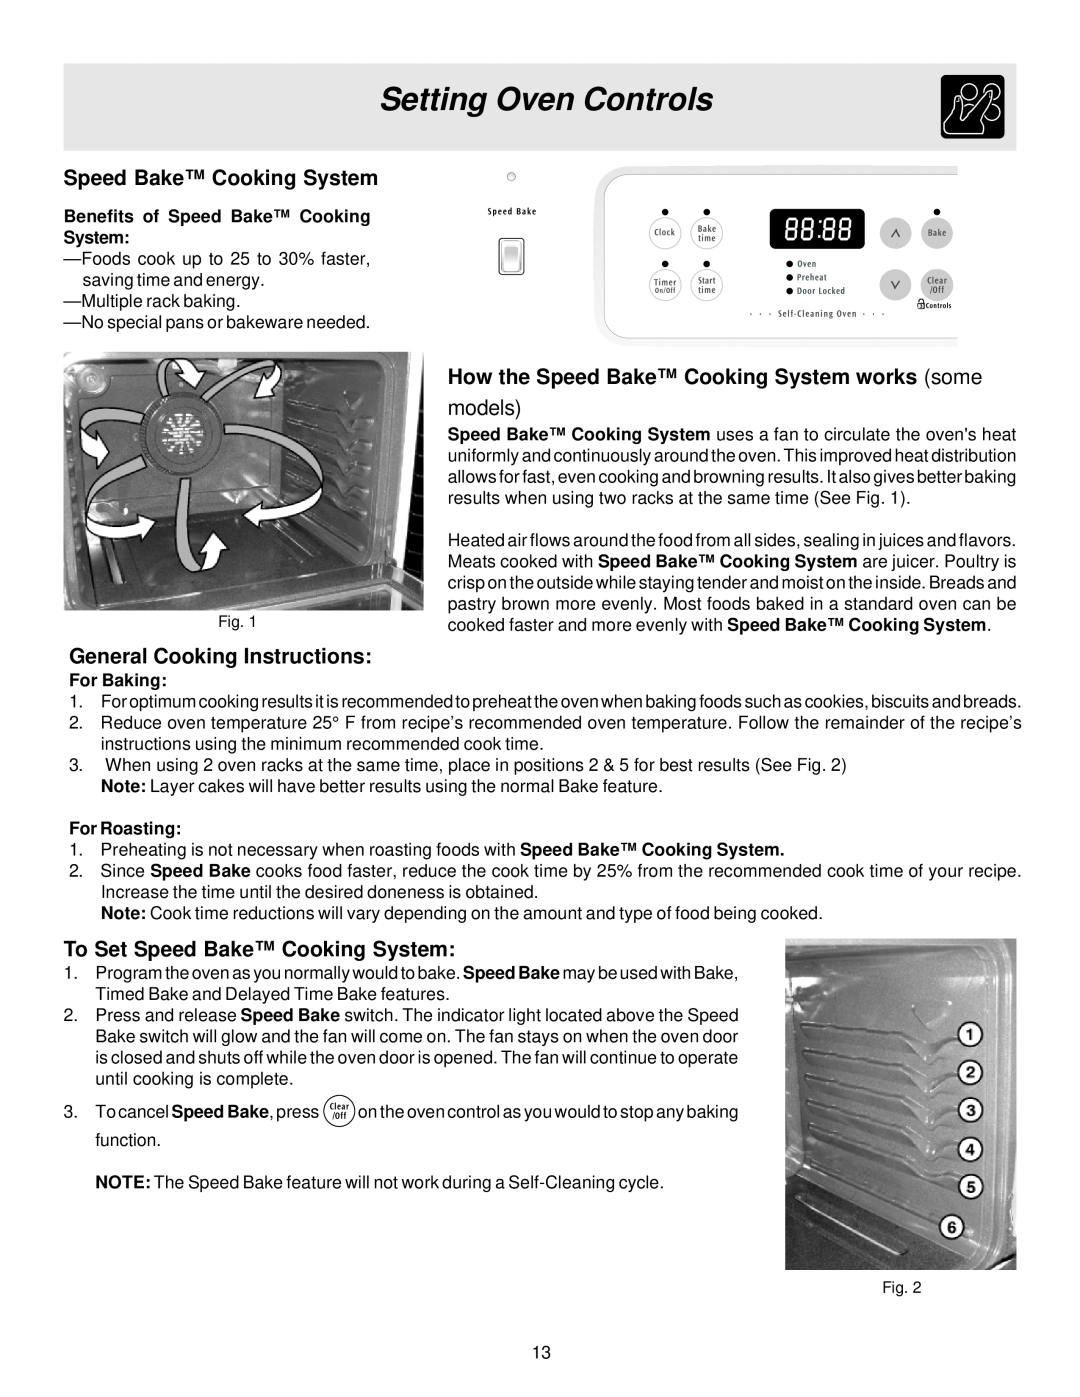 Frigidaire ES300 How the Speed Bake Cooking System works some, General Cooking Instructions, Setting Oven Controls 